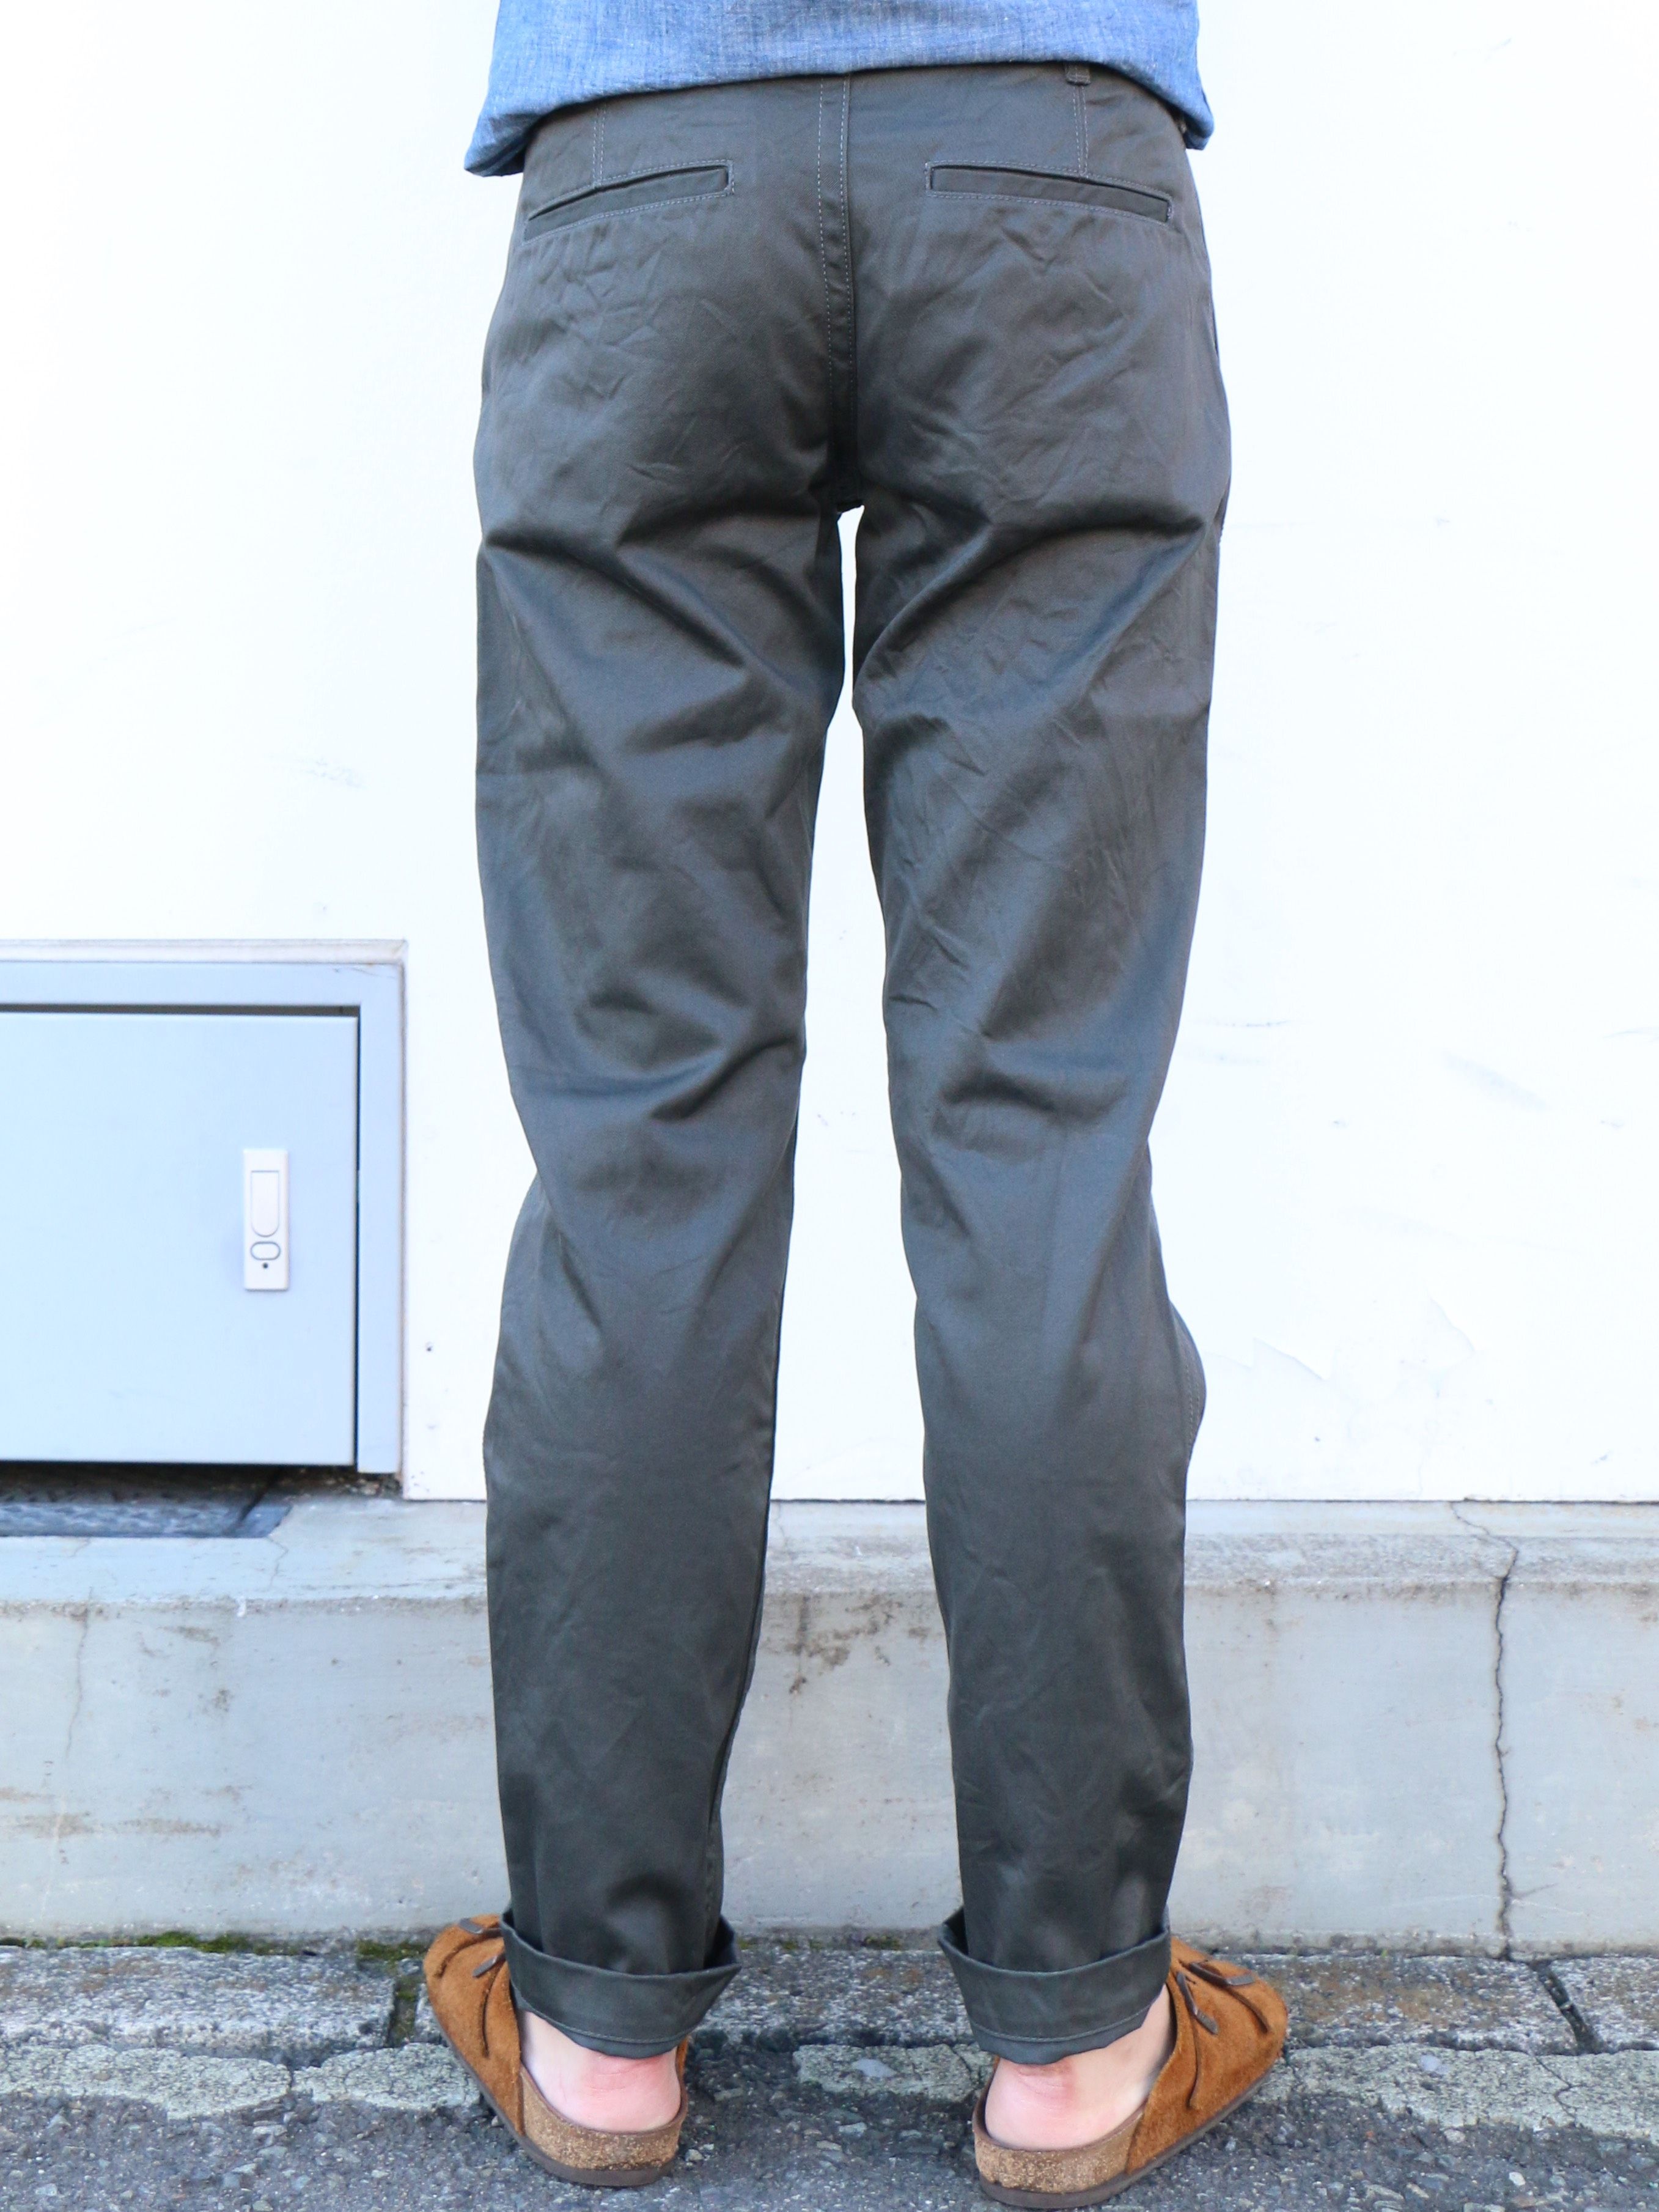 F0444 NARROW FUSION TAPERED TROUSER / CHINO (63 CHARCOAL) - FOB 